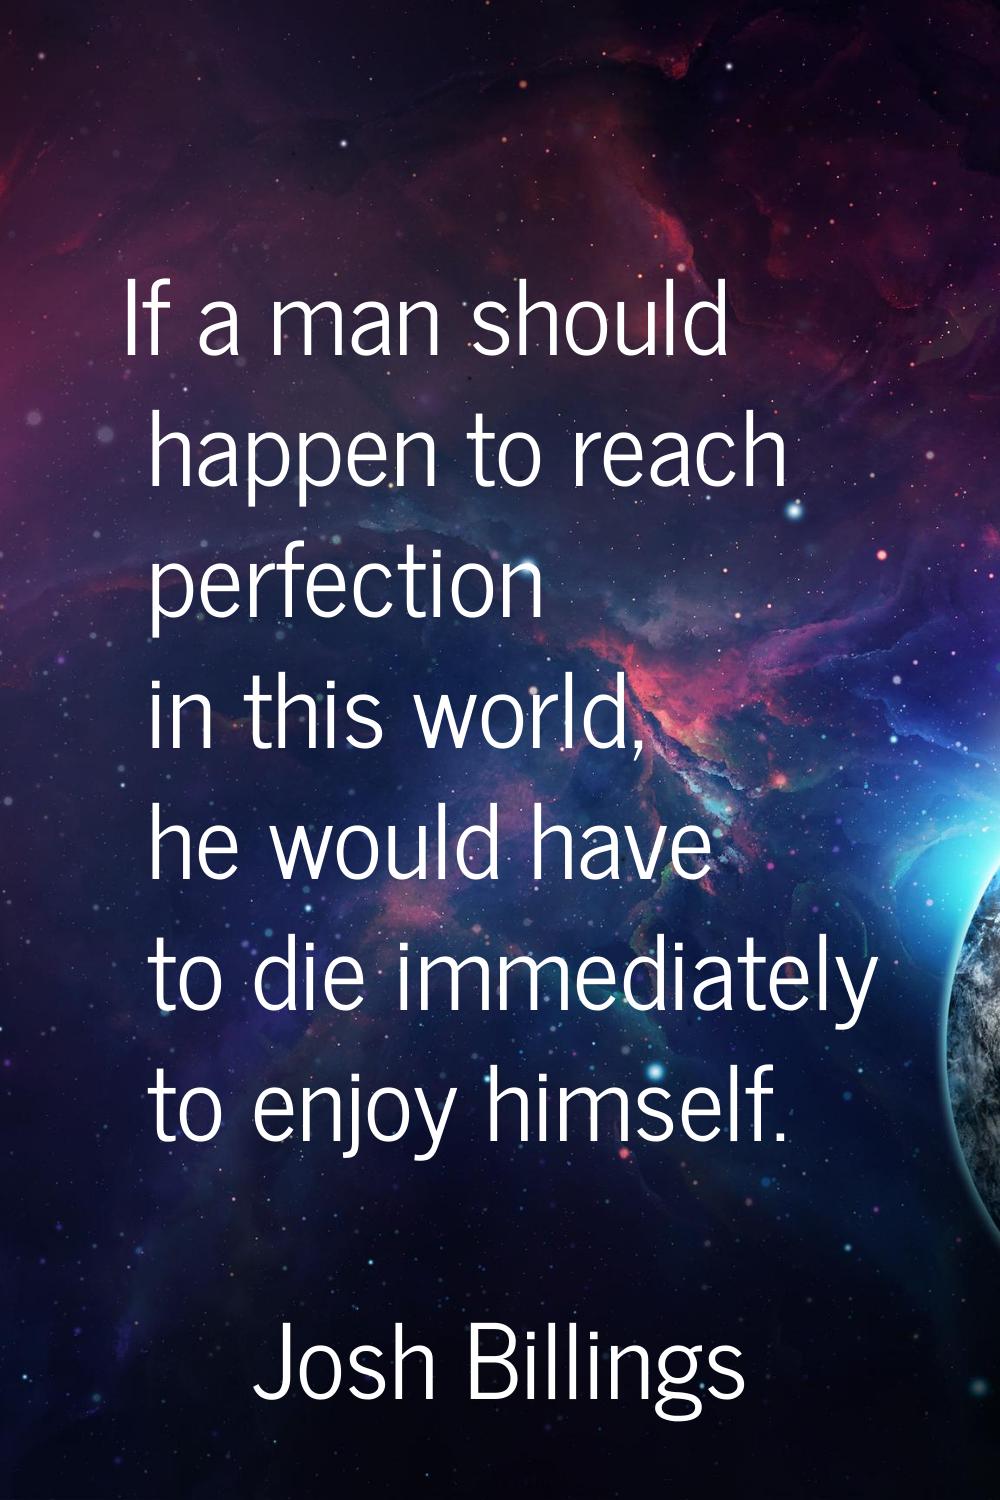 If a man should happen to reach perfection in this world, he would have to die immediately to enjoy